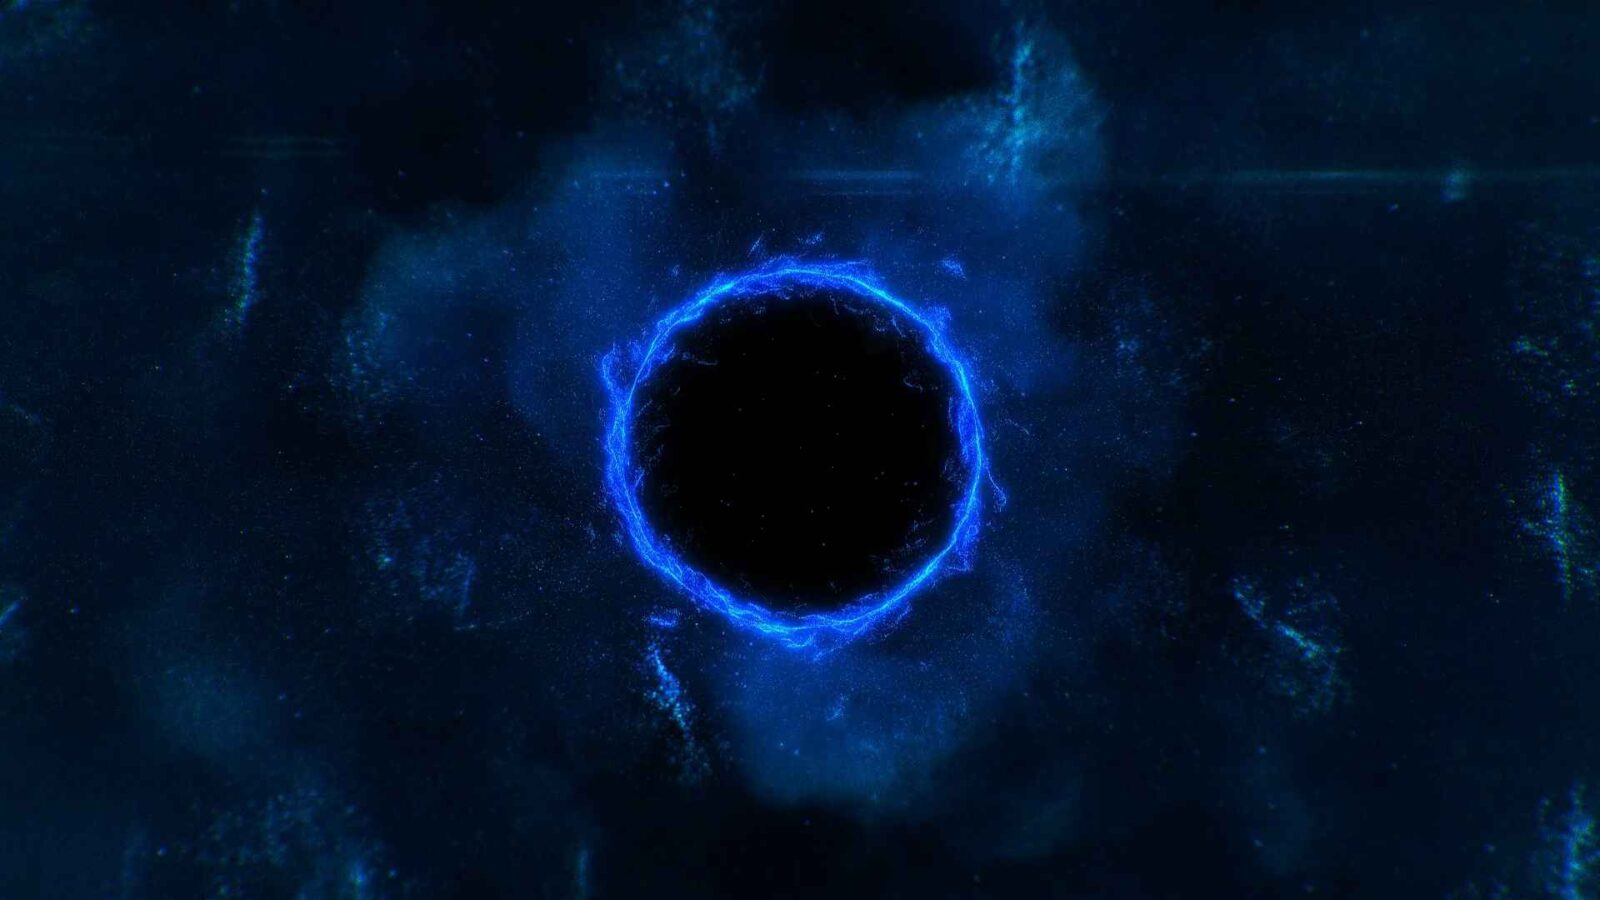 Animated Black Hole Space - Free Live Wallpaper - Live Desktop Wallpapers